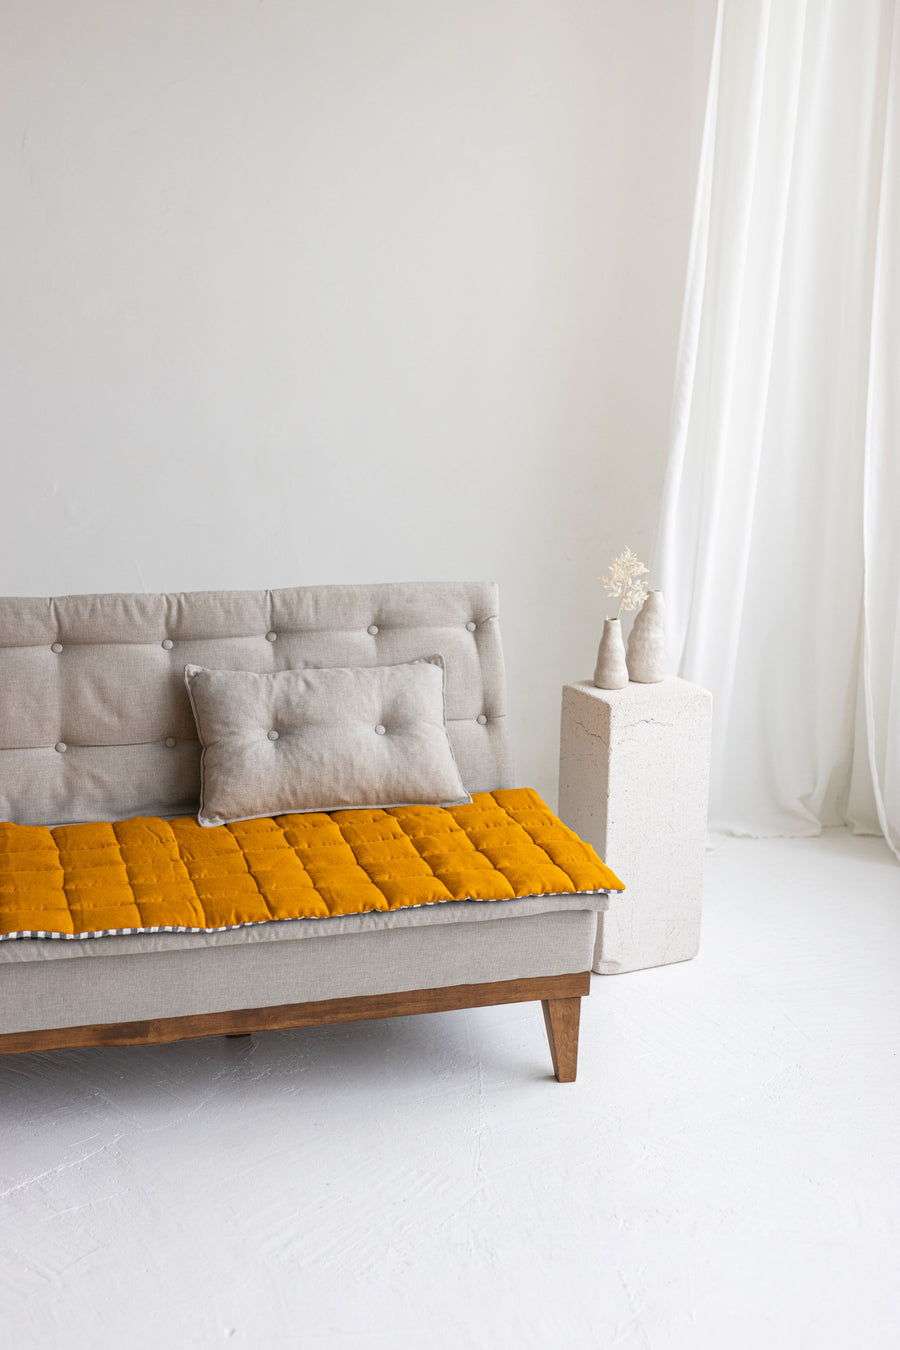 Two-sided Mustard Linen Couch Cover